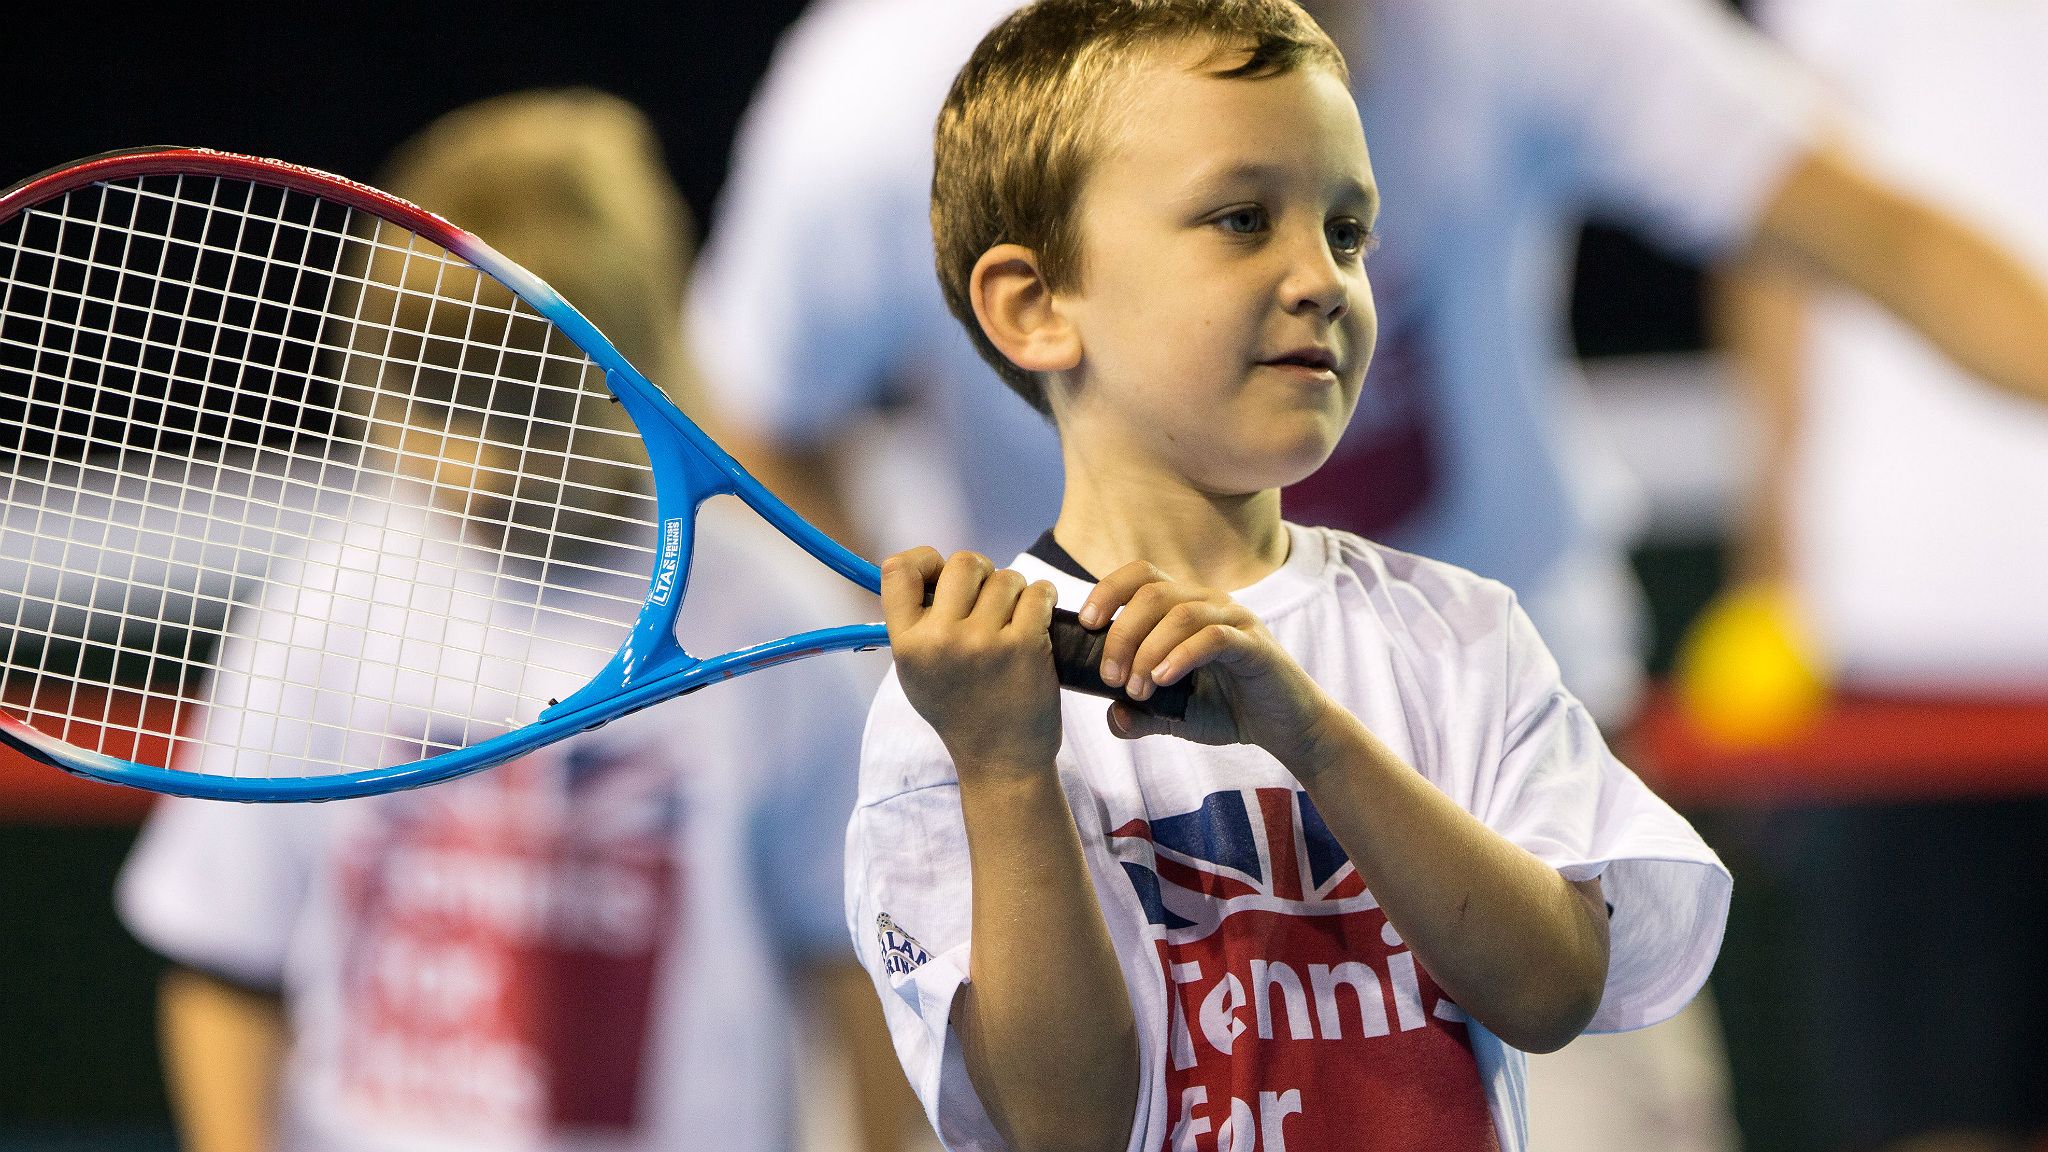 Child taking part in a Tennis for Kids session